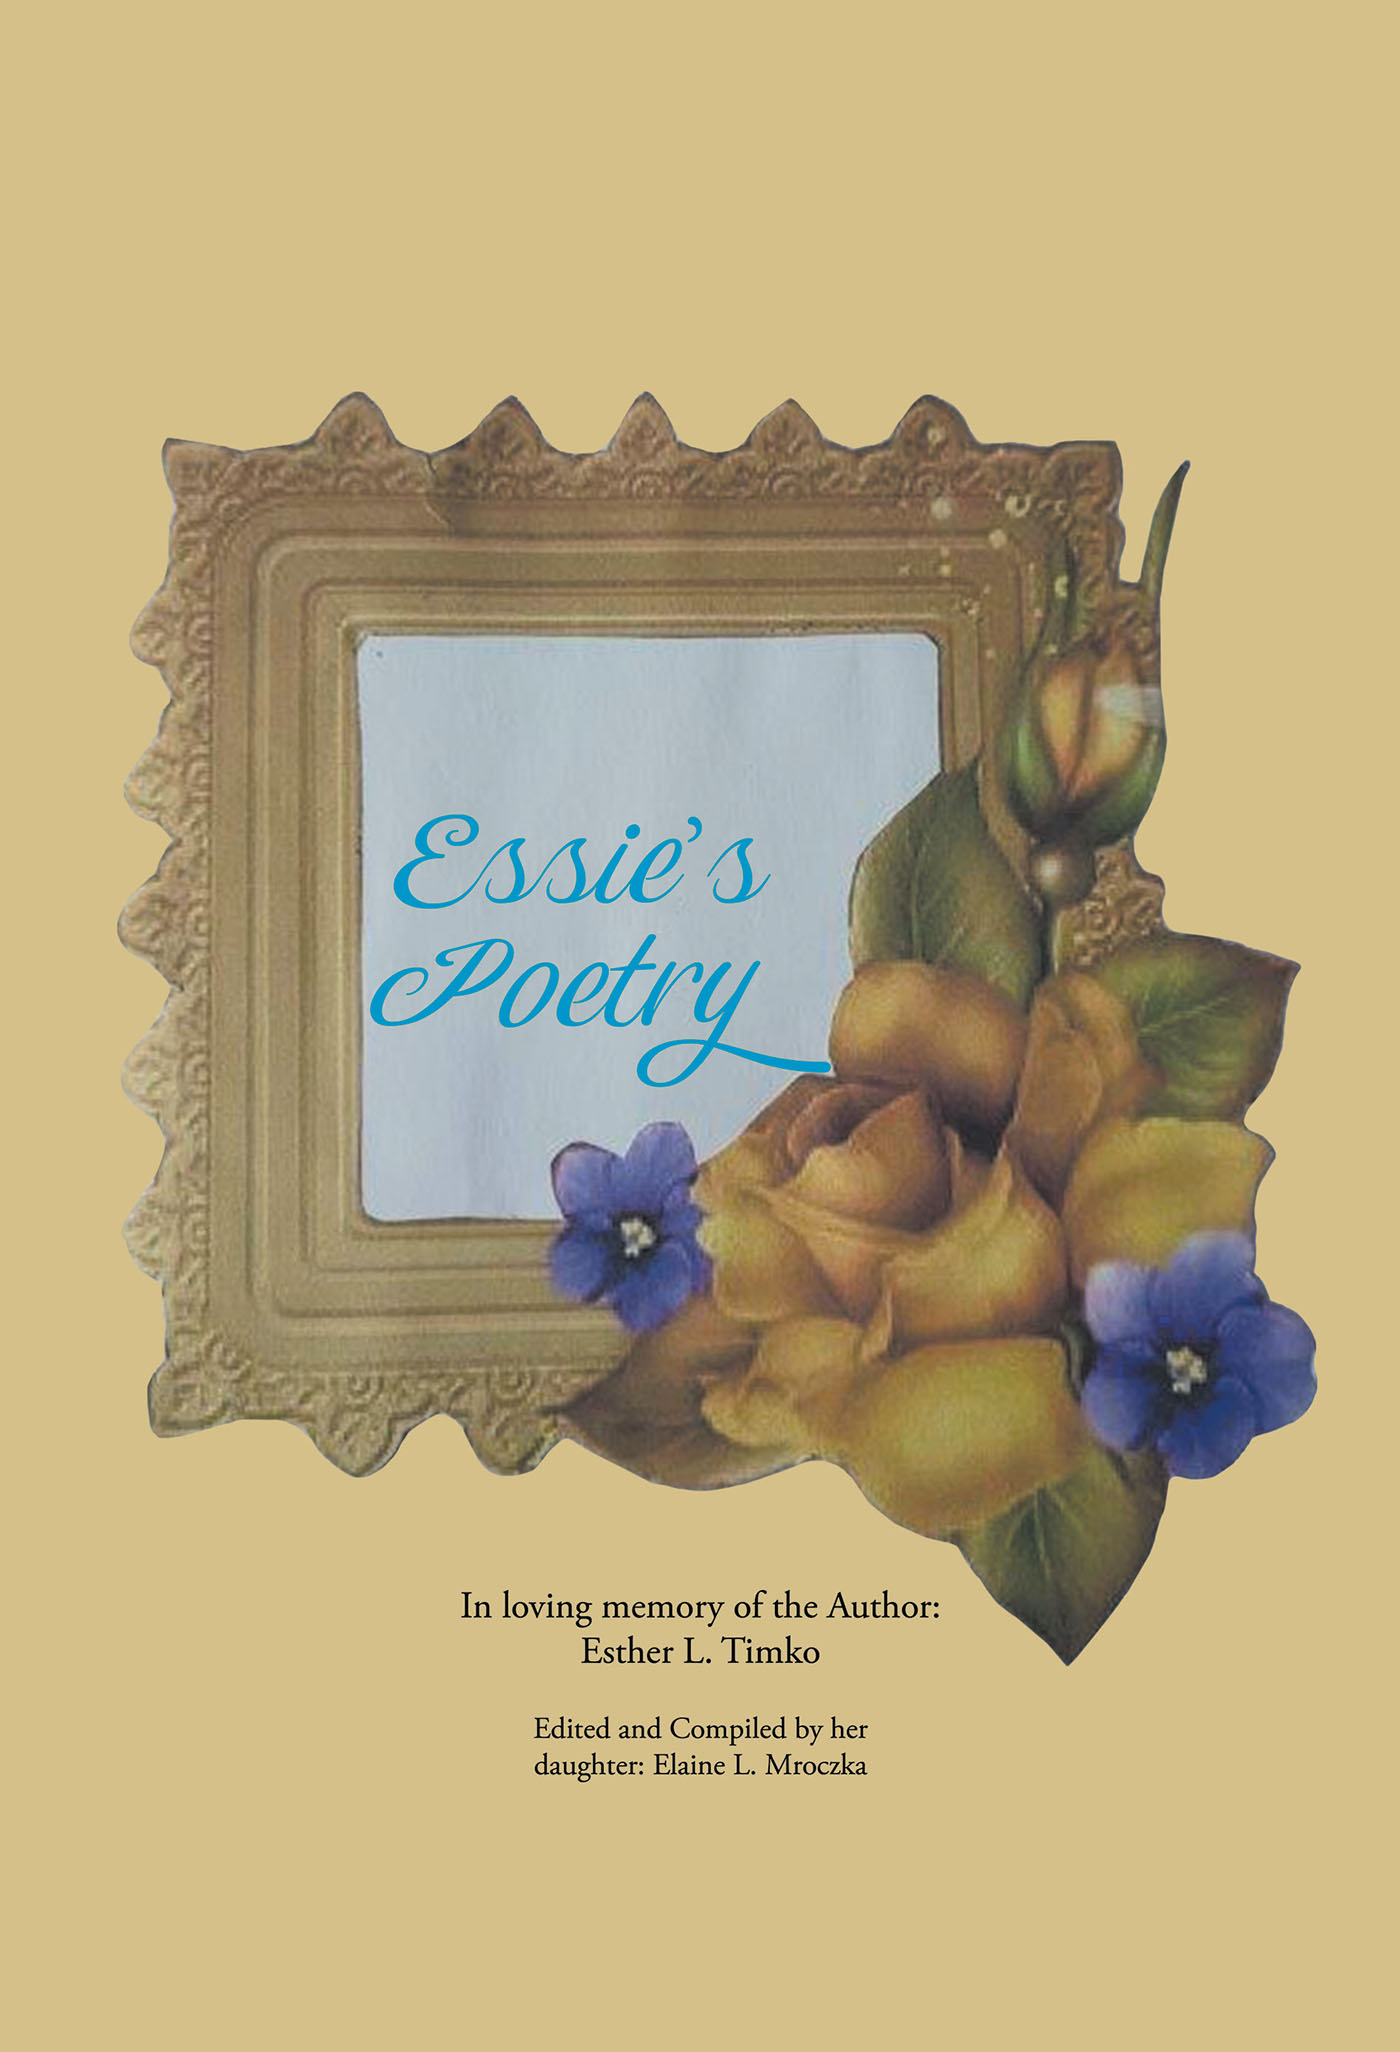 Esther L. Timko’s New Book, "Essie's Poetry," is a Compelling and Meaningful Collection of Beautiful Poetry, as Compiled and Edited by the Author’s Daughter